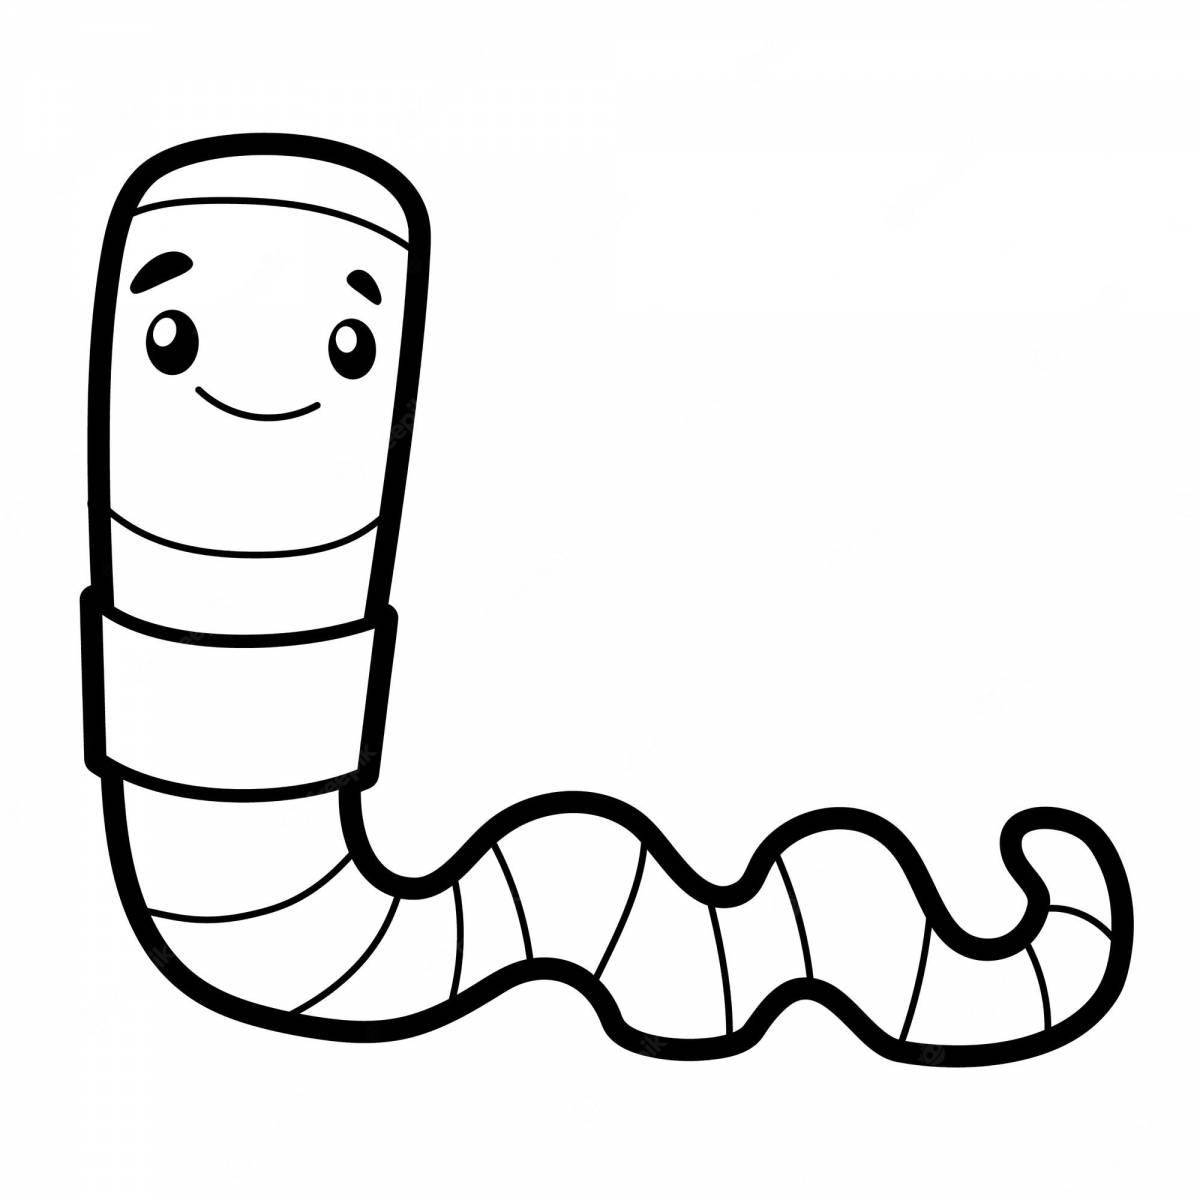 Coloring page charming worm